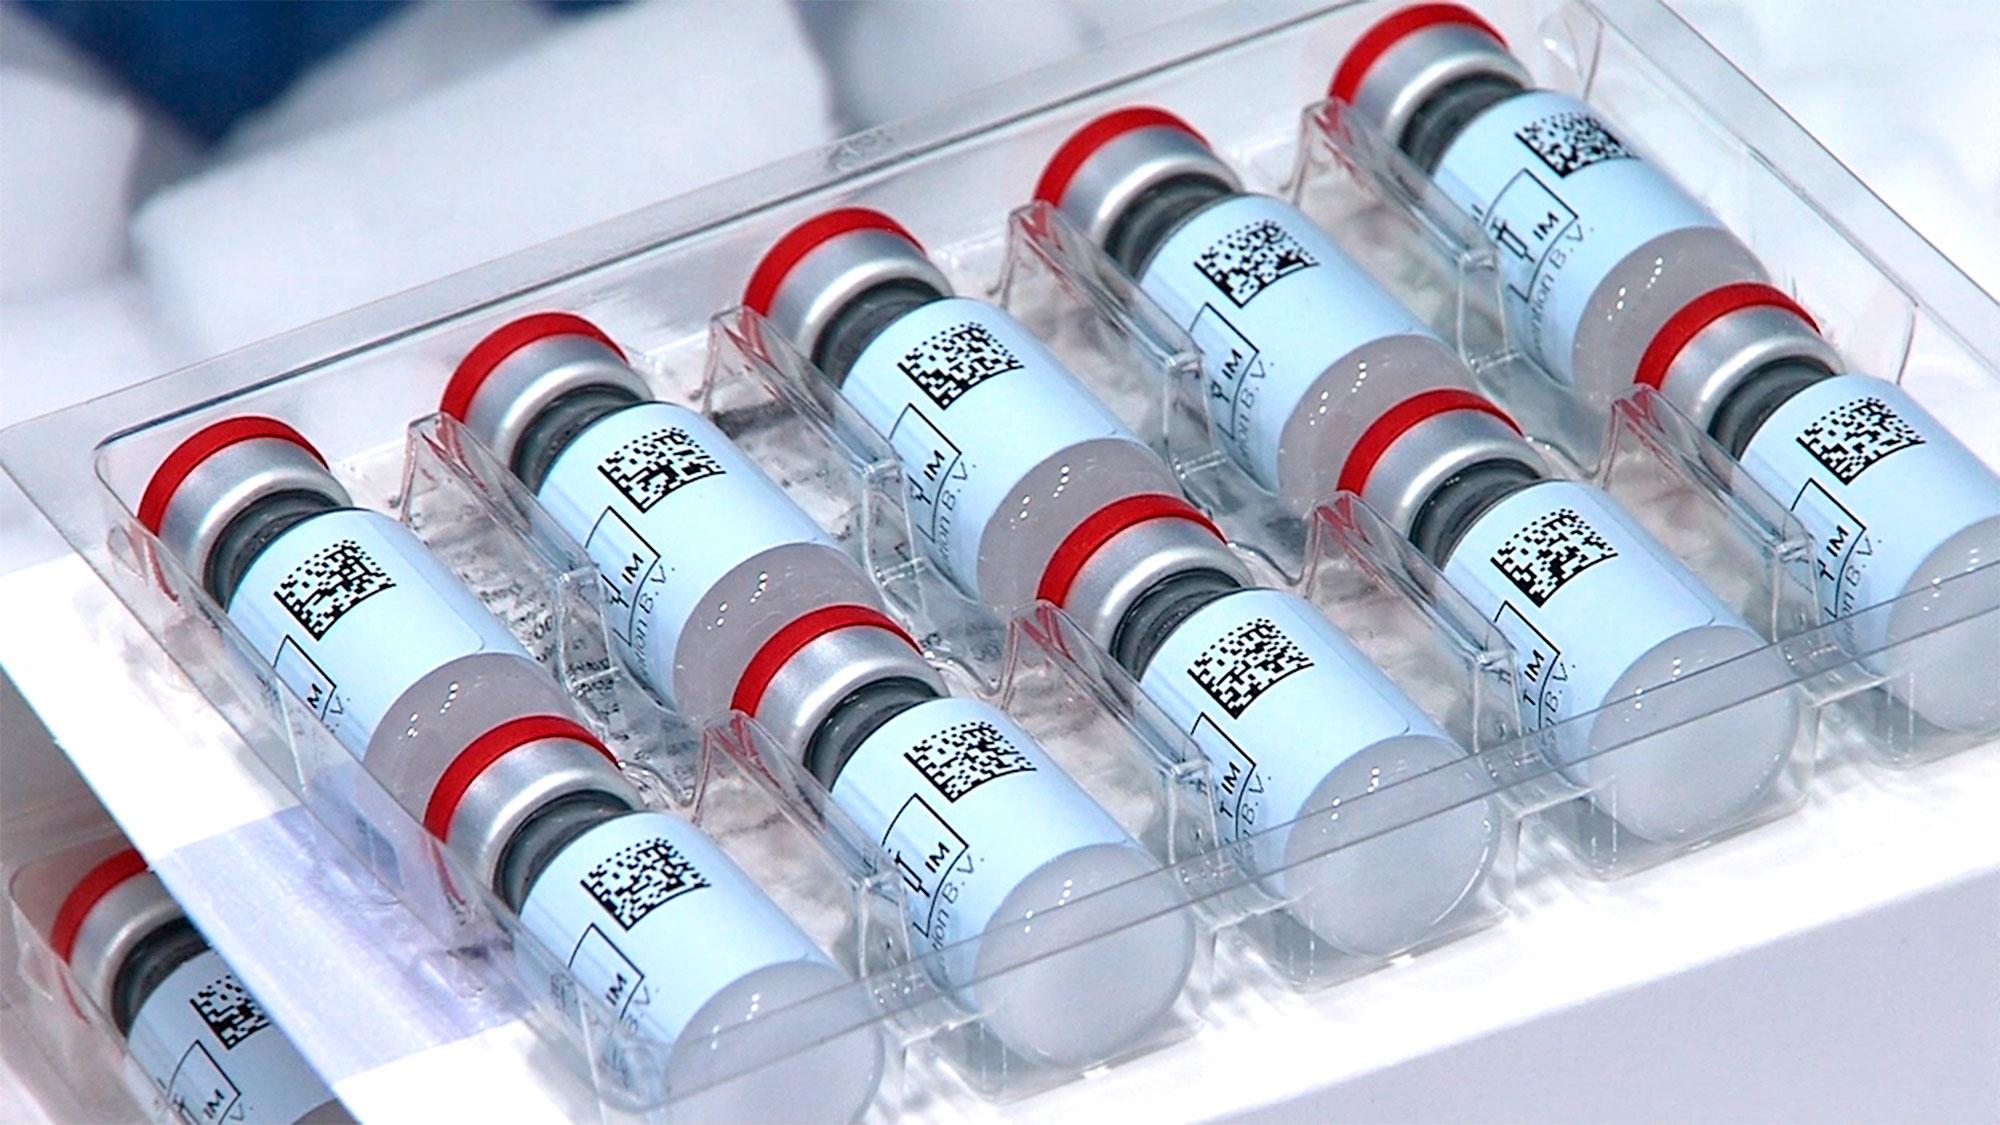 This December 2020 photo provided by Johnson & Johnson shows vials of the Covid-19 vaccine in the United States.